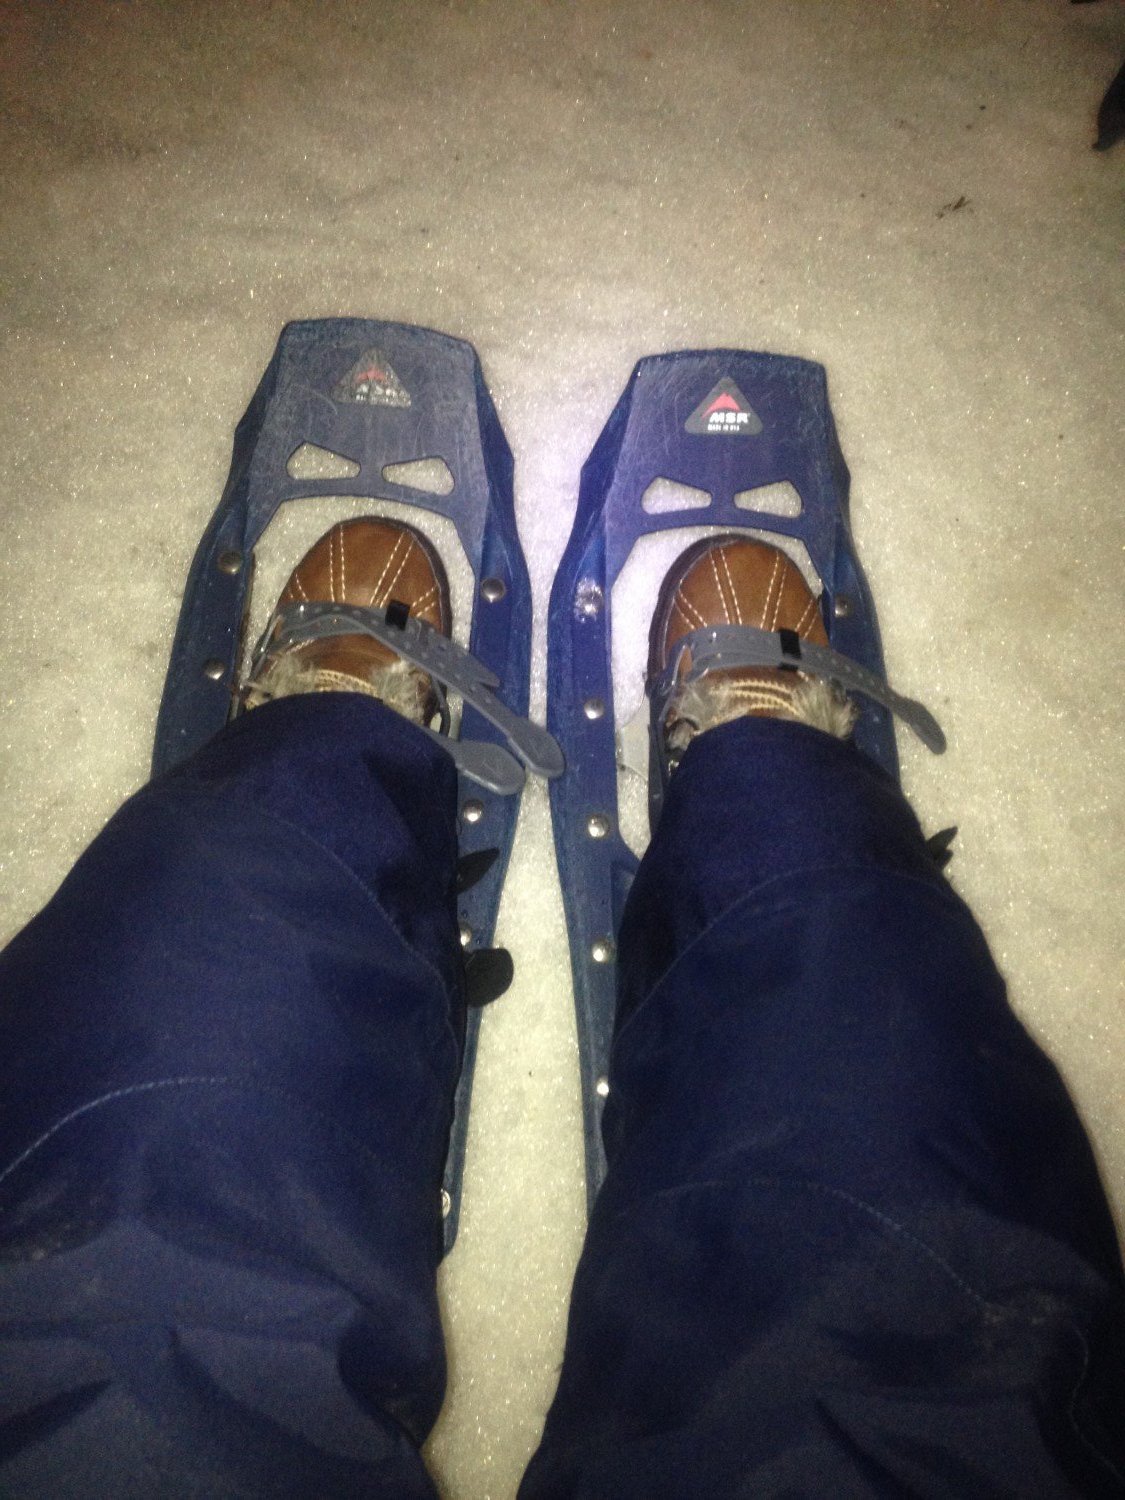 Don't step on my blue snowshoes